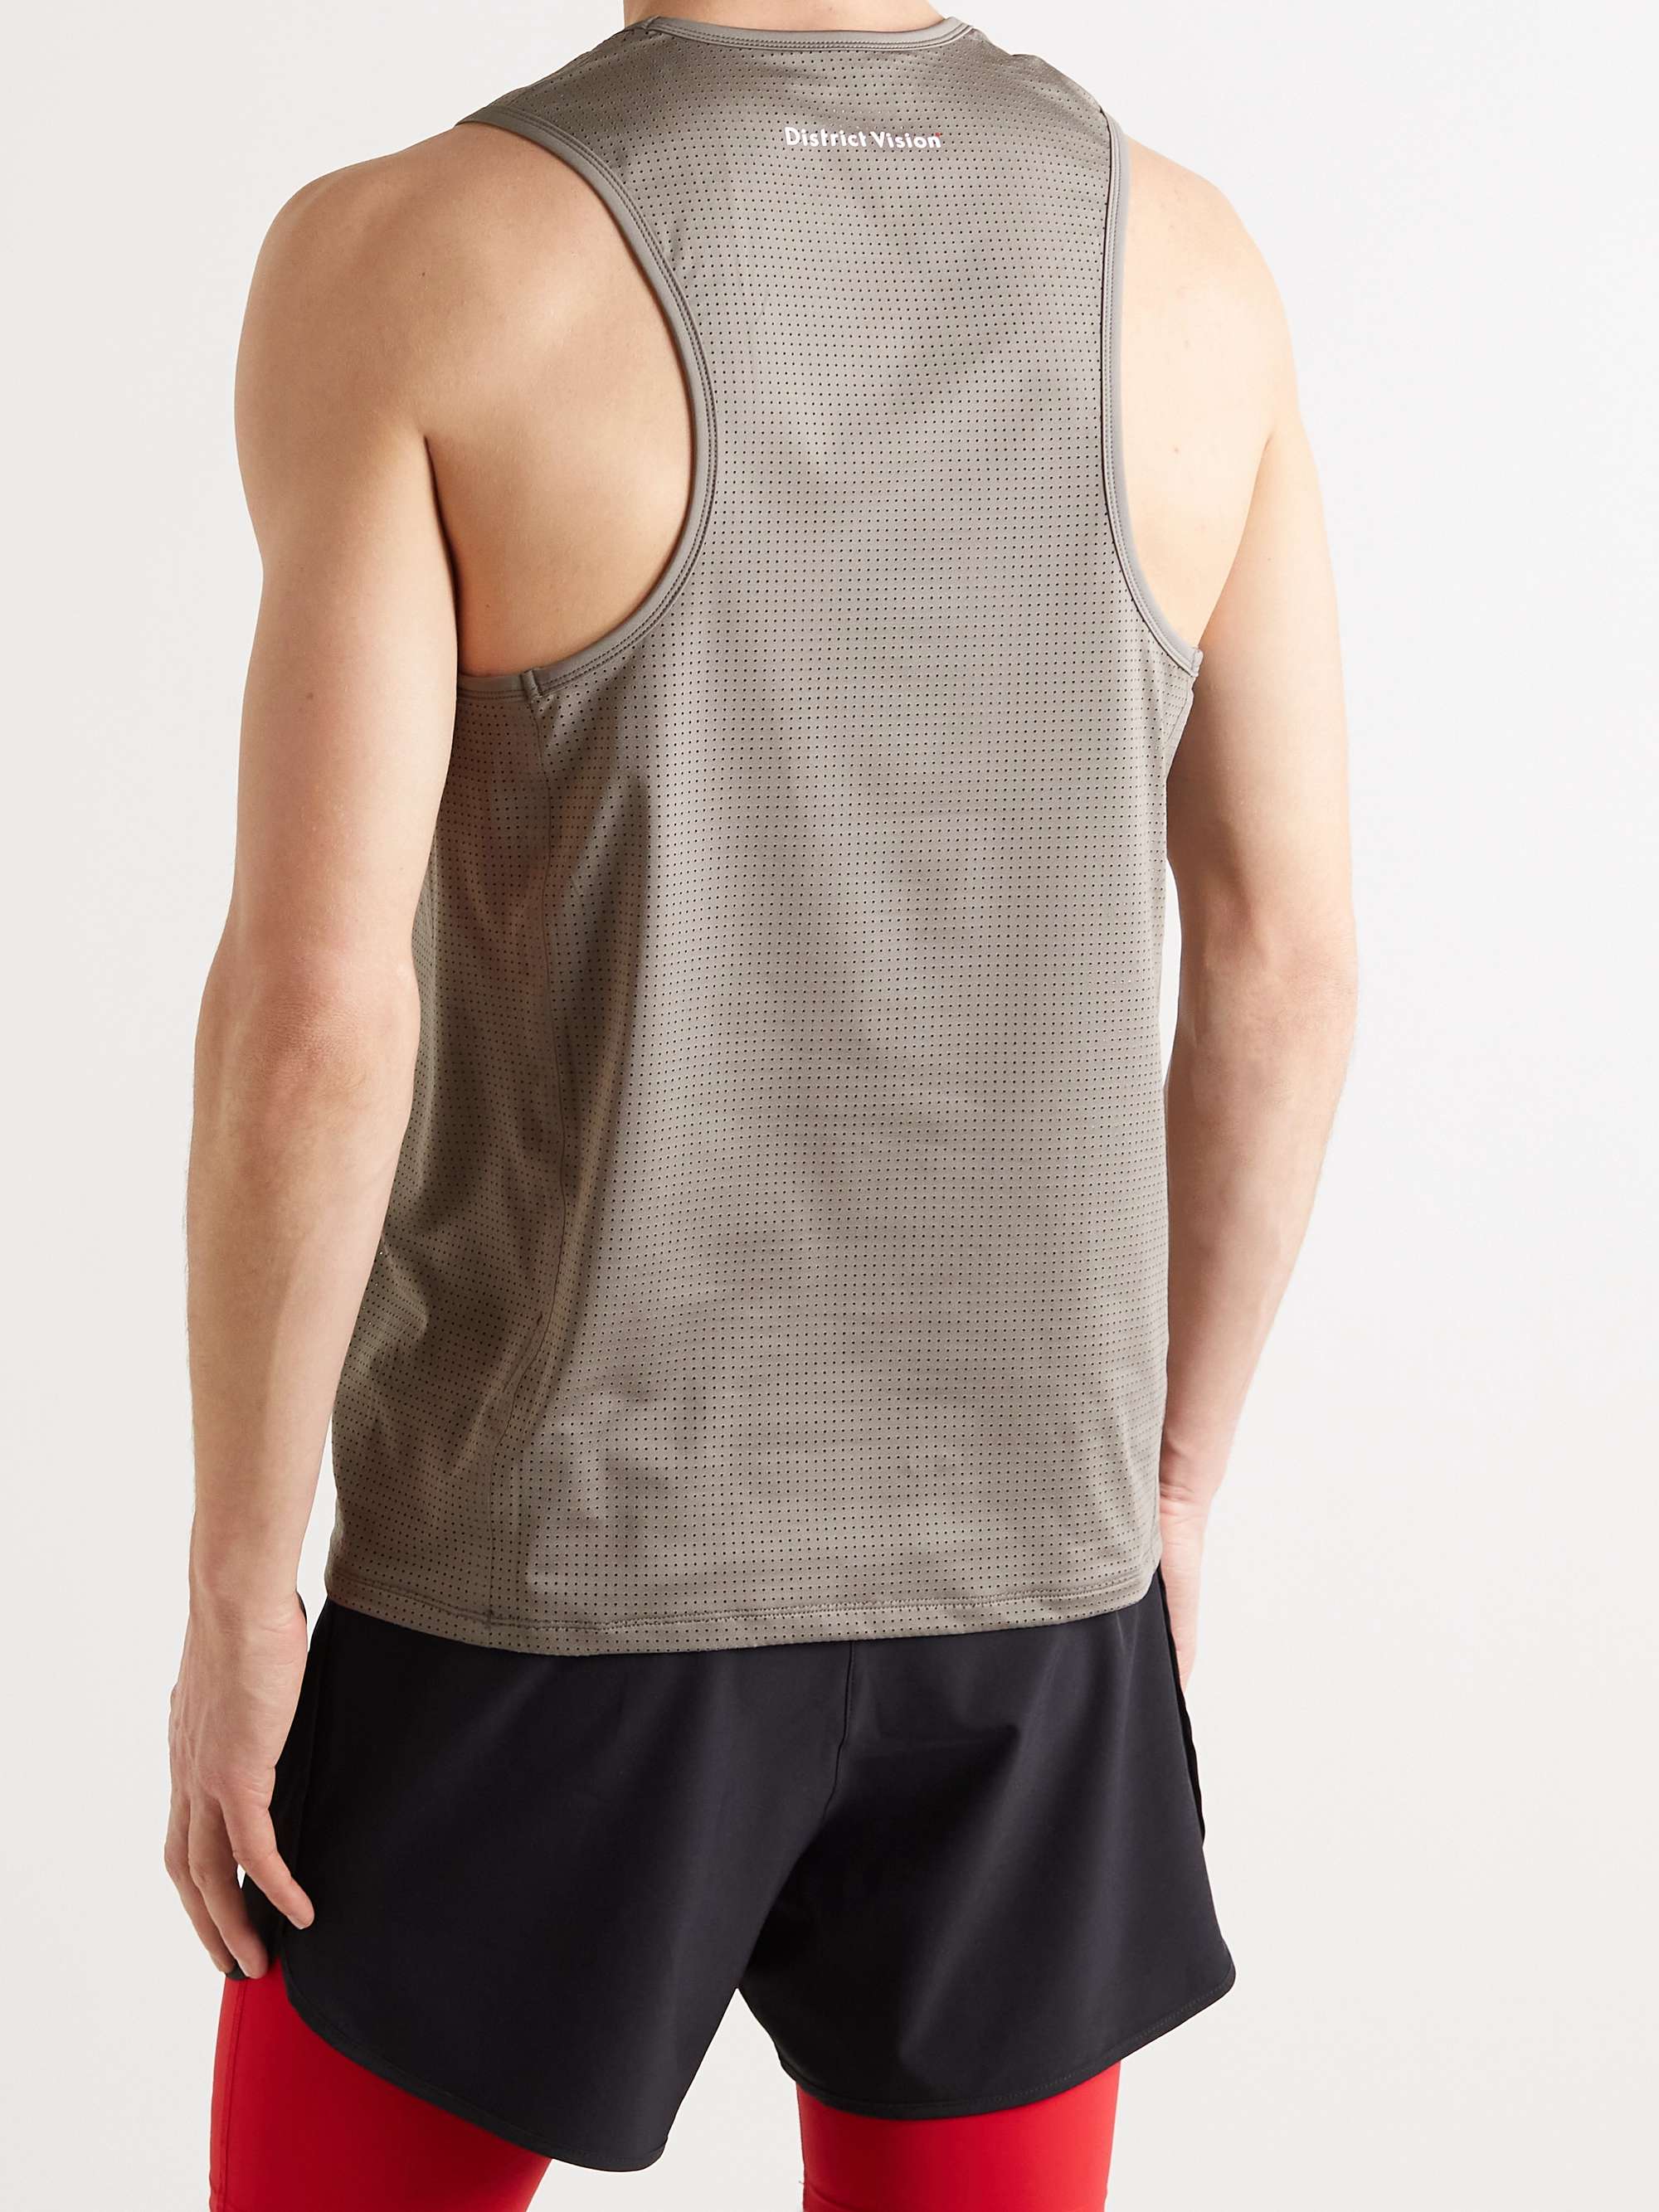 DISTRICT VISION Logo-Print Perforated Stretch-Jersey Running Tank Top